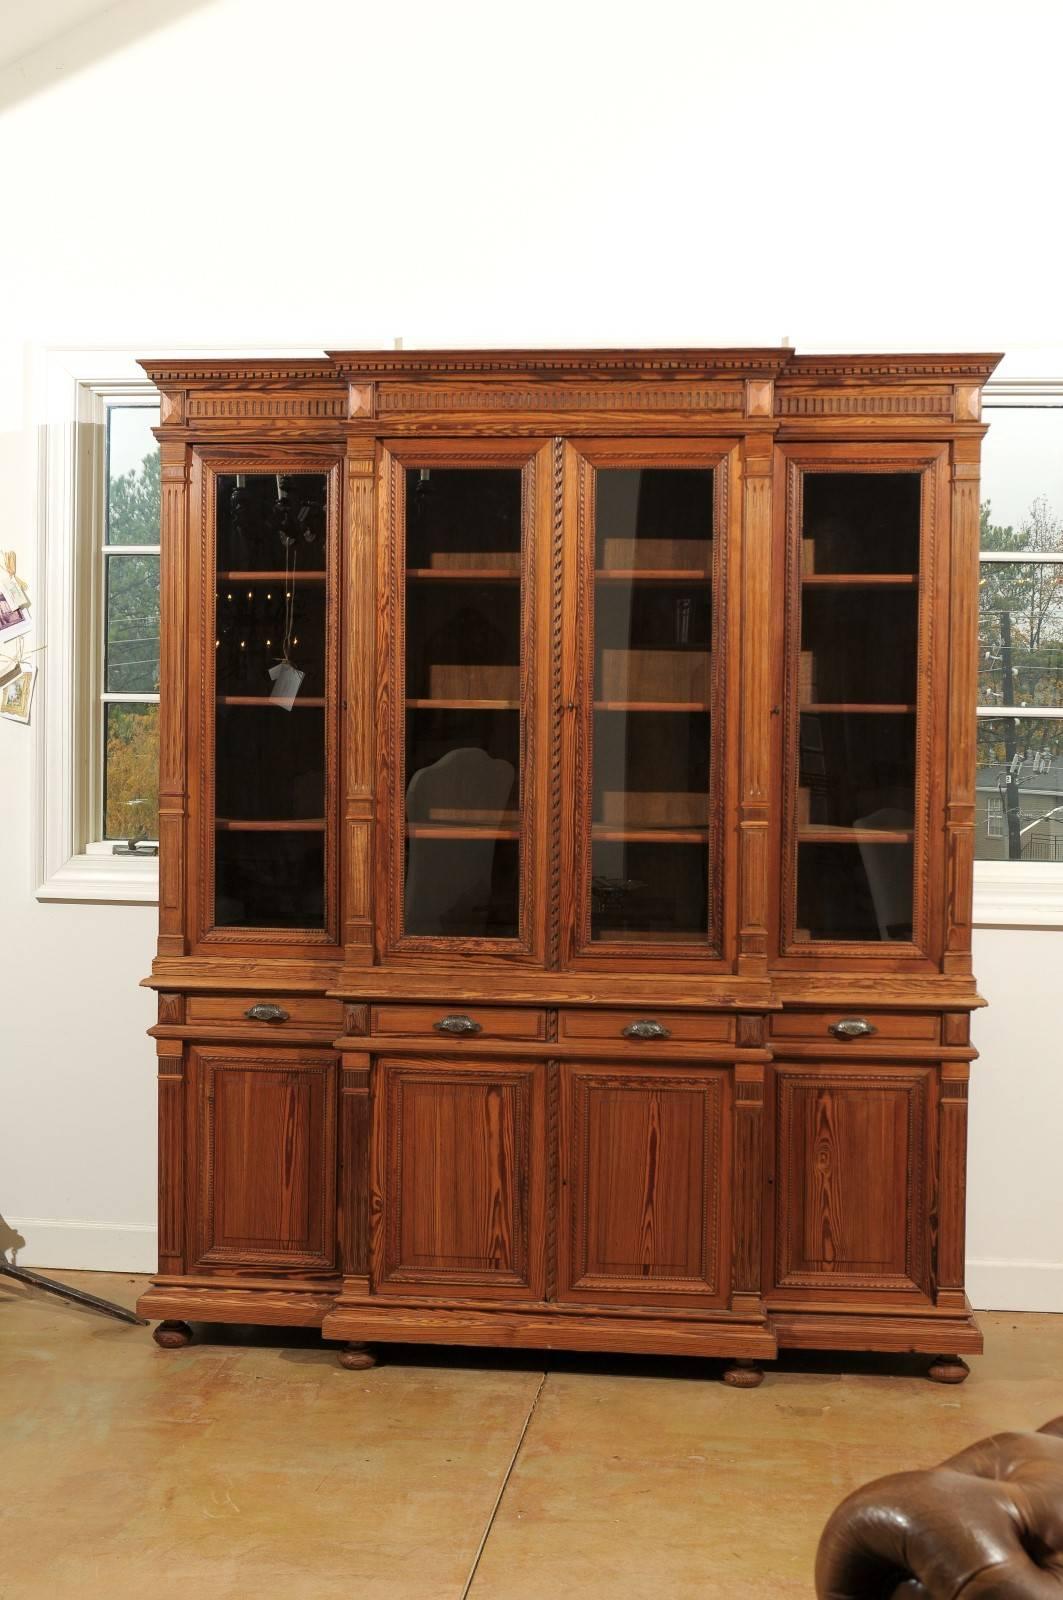 Neoclassical French Pitch Pine Glass Doors Breakfront Bookcase from the Turn of the Century